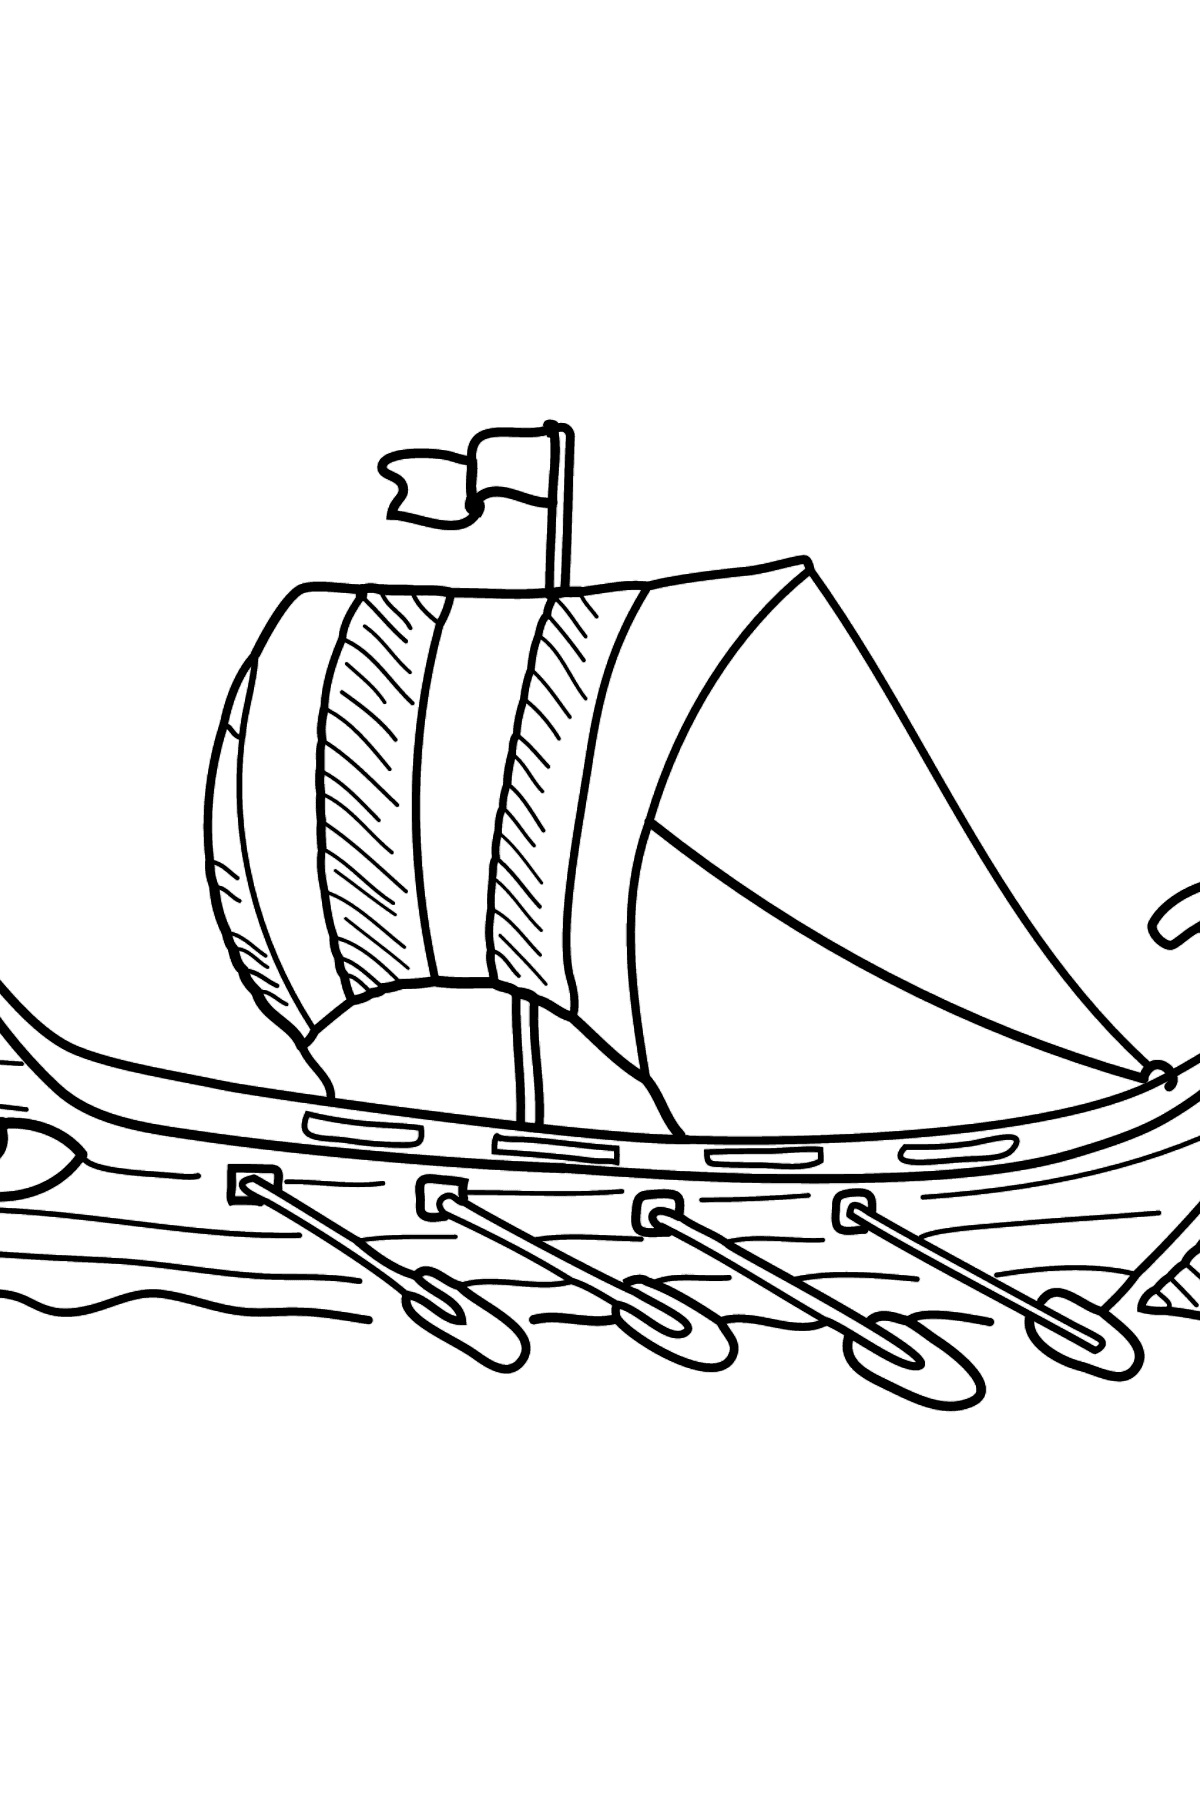 Coloring Page - A River Rowing Boat - Coloring Pages for Kids